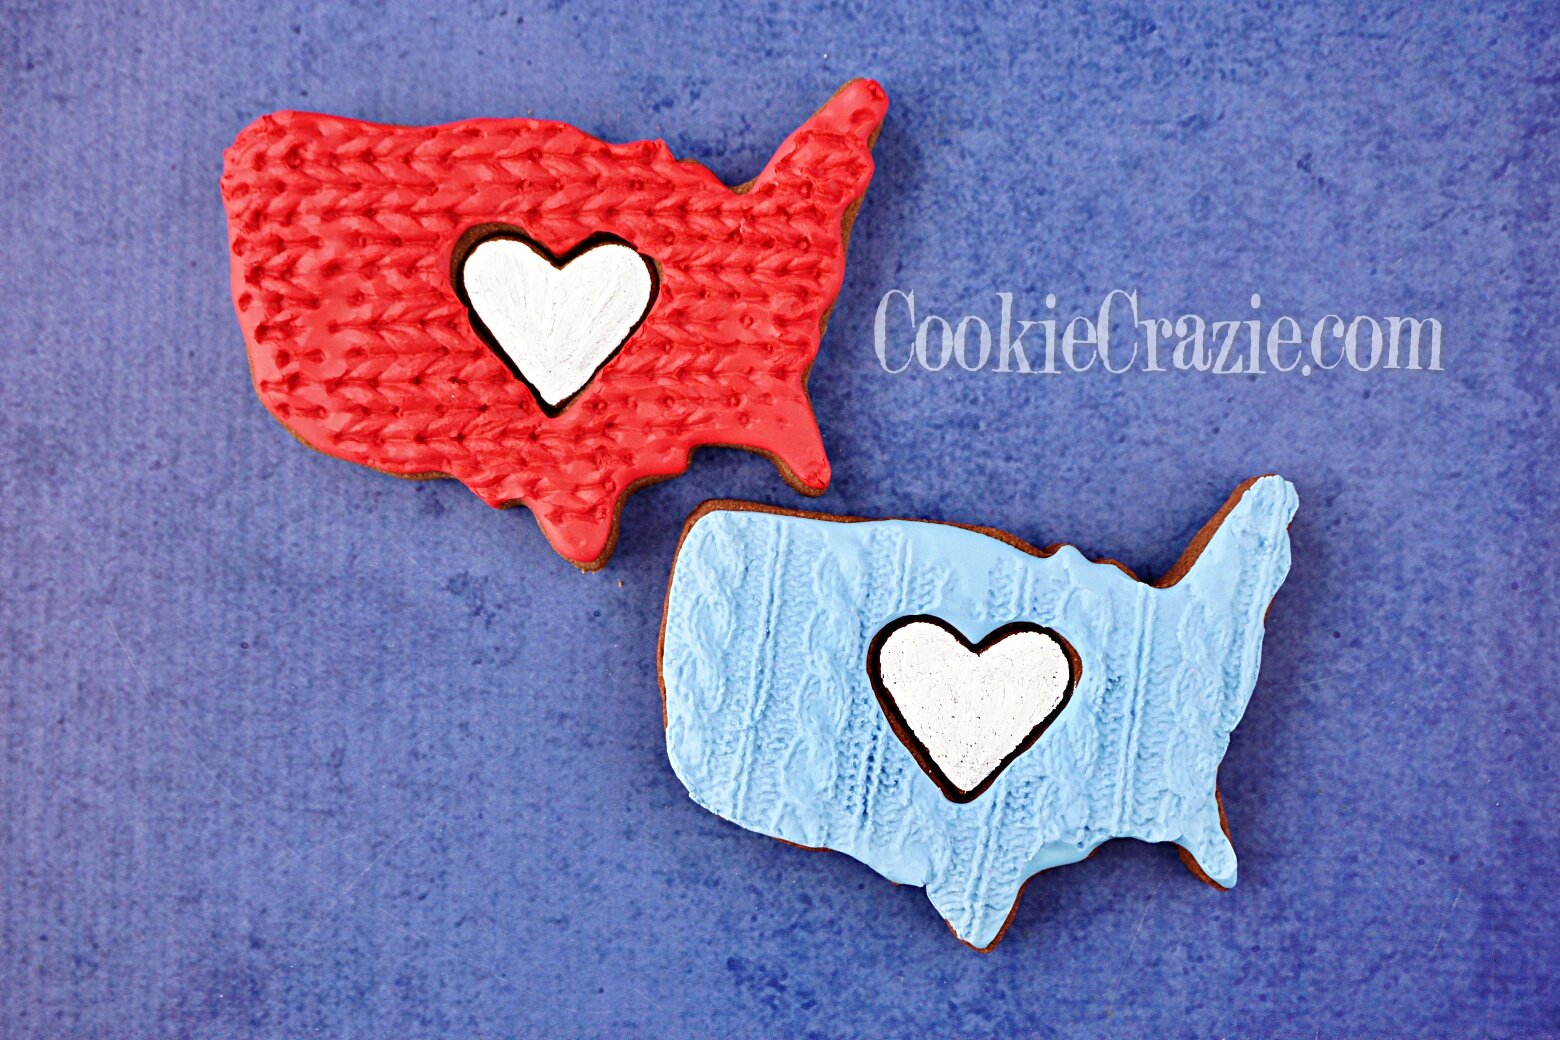  Knitted USA Decorated Sugar Cookie YouTube video  HERE  